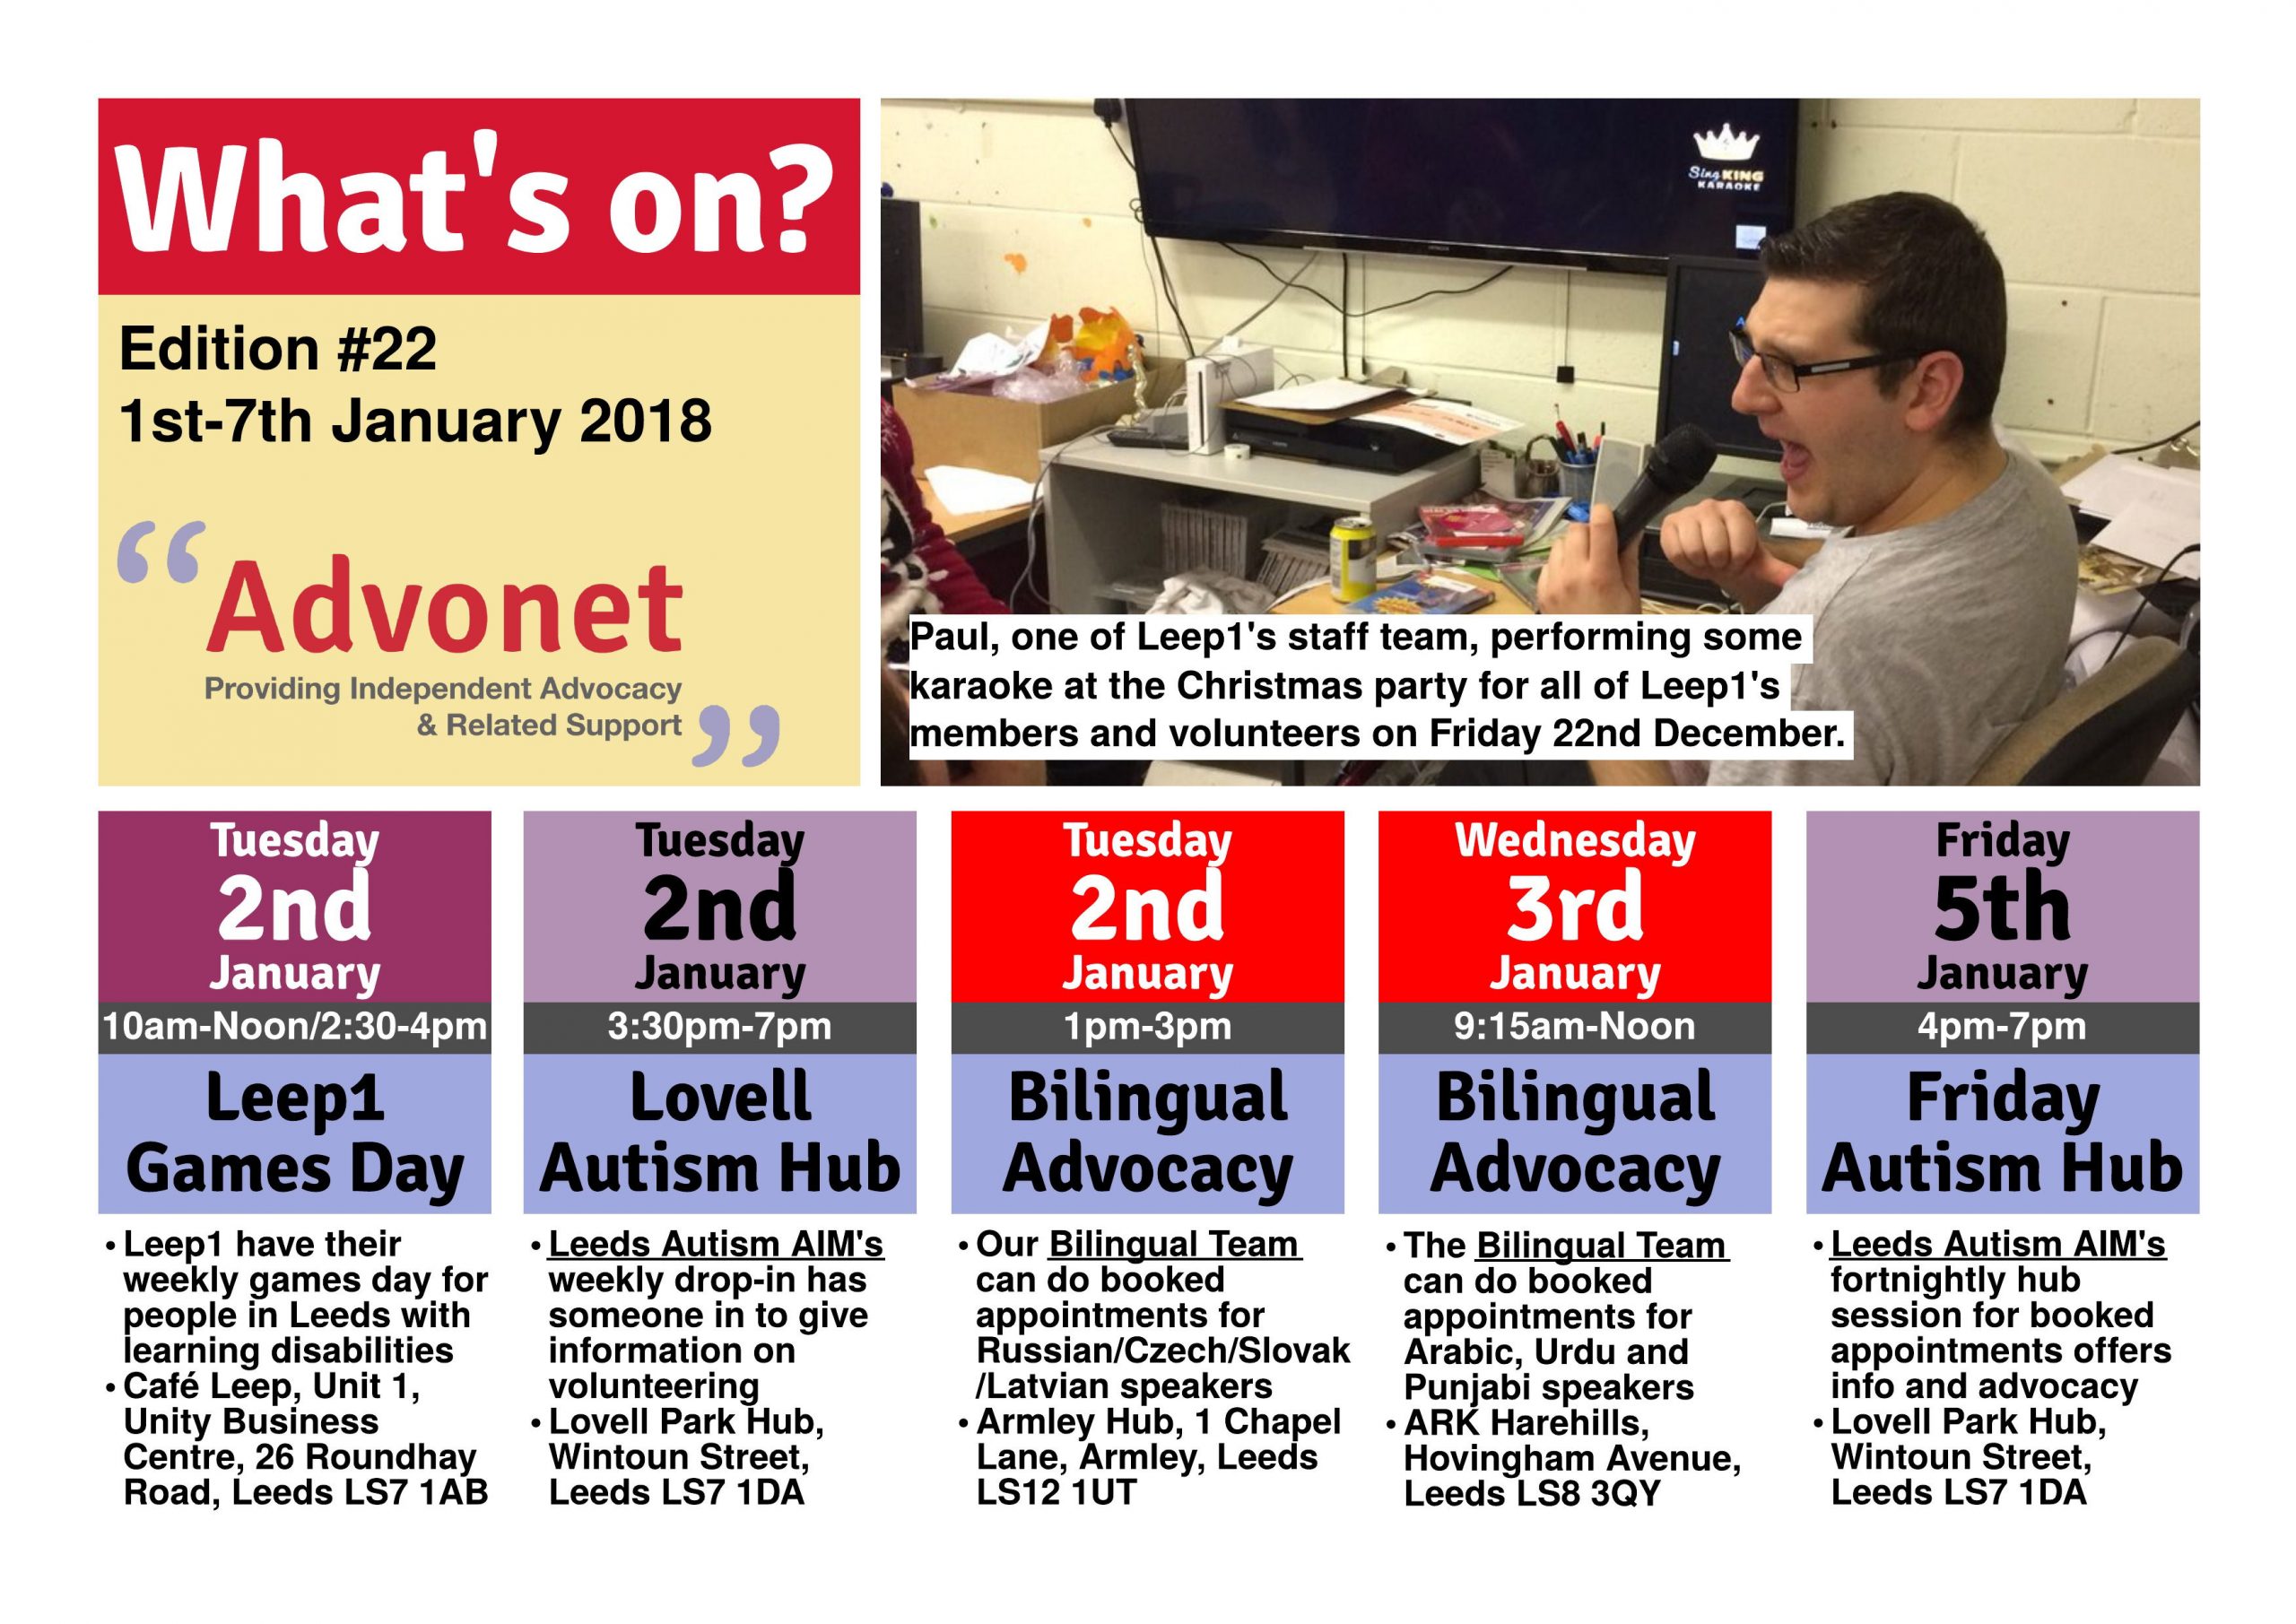 What's on 1st-7th Jan